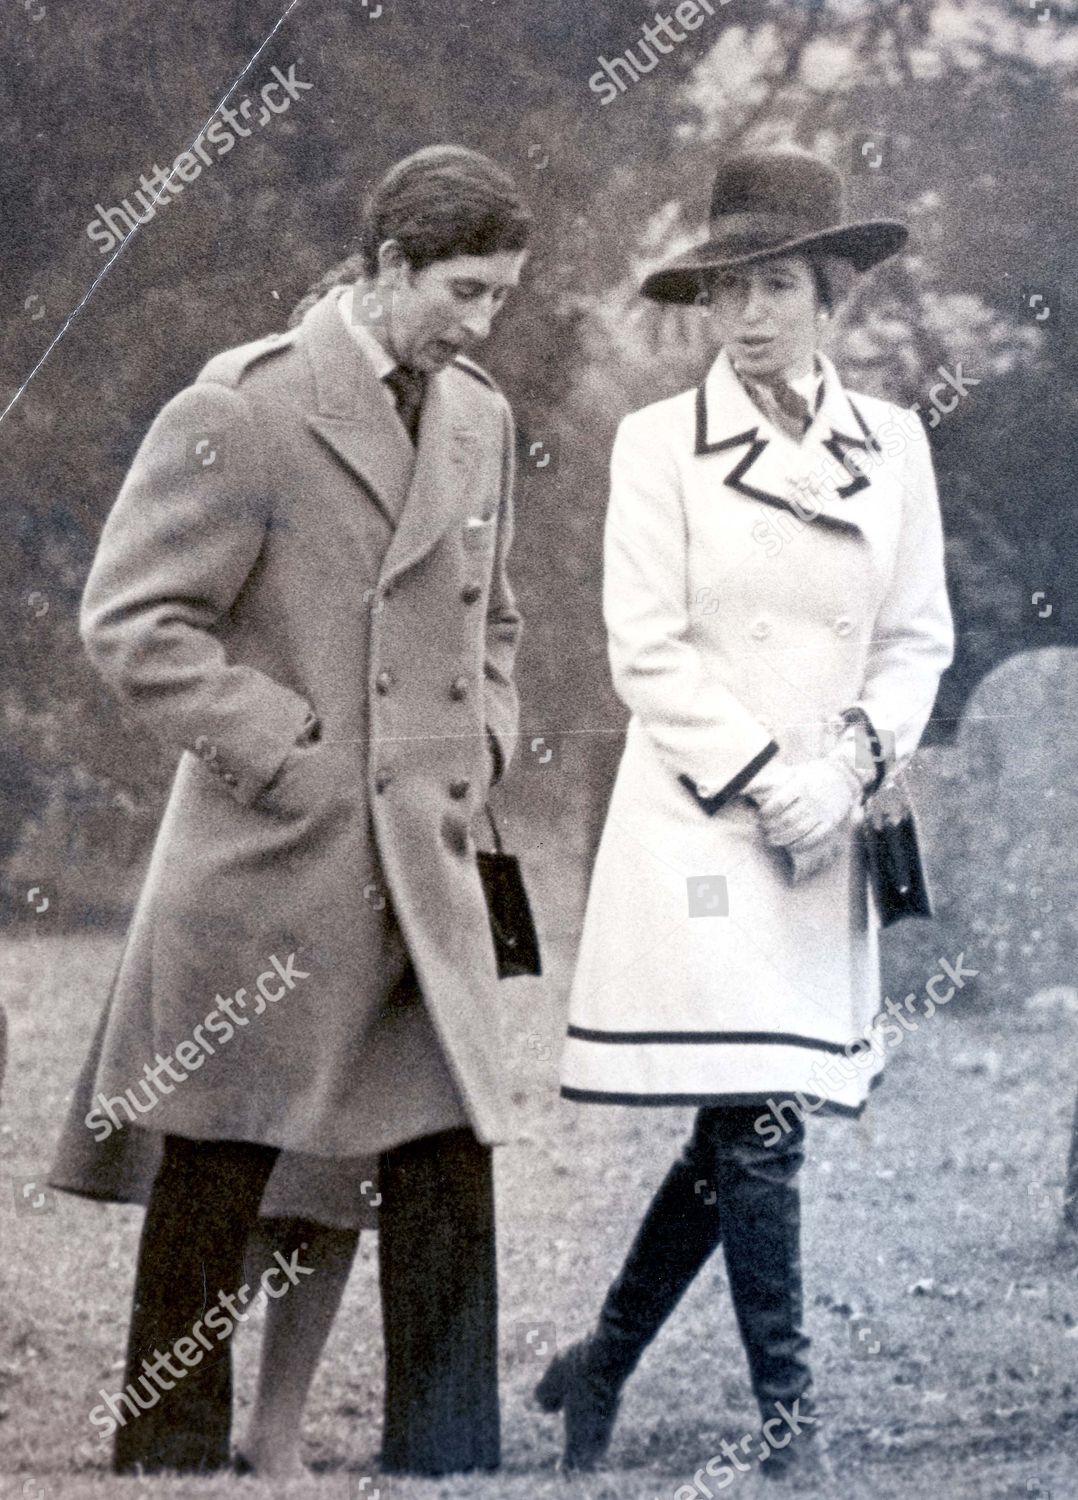 prince-of-wales-1972-1973-picture-shows-the-prince-of-wales-with-princess-anne-attending-church-service-at-castle-rising-norfolk-shutterstock-editorial-896617a.jpg